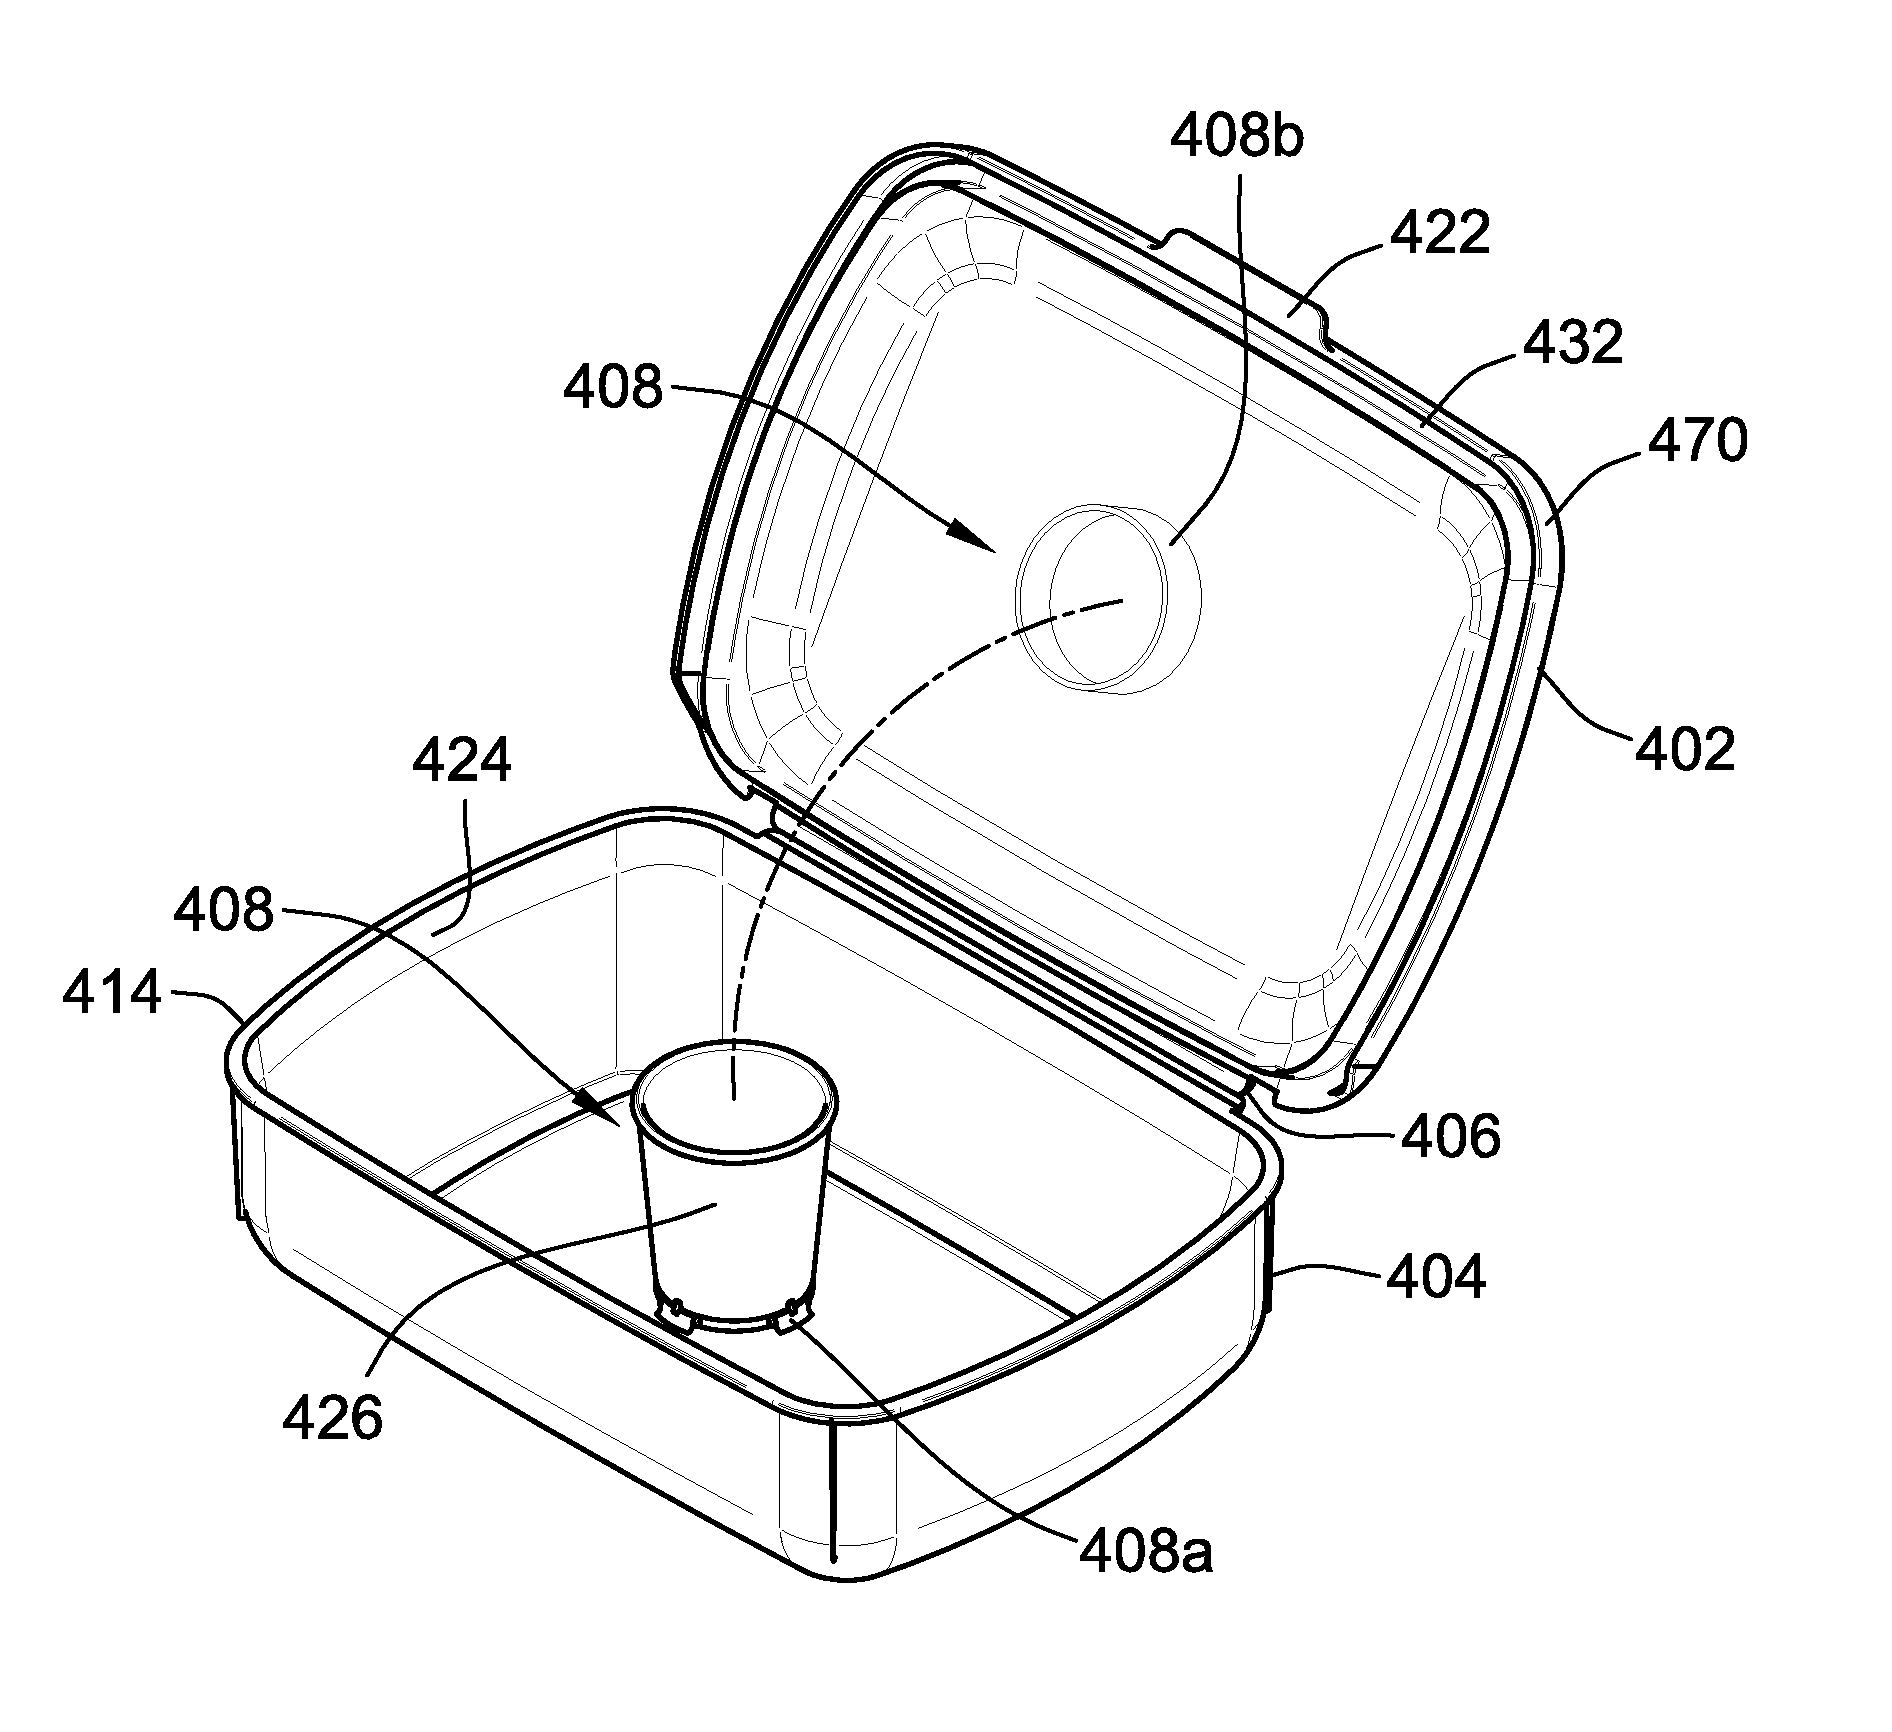 Container having a pre-curved lid